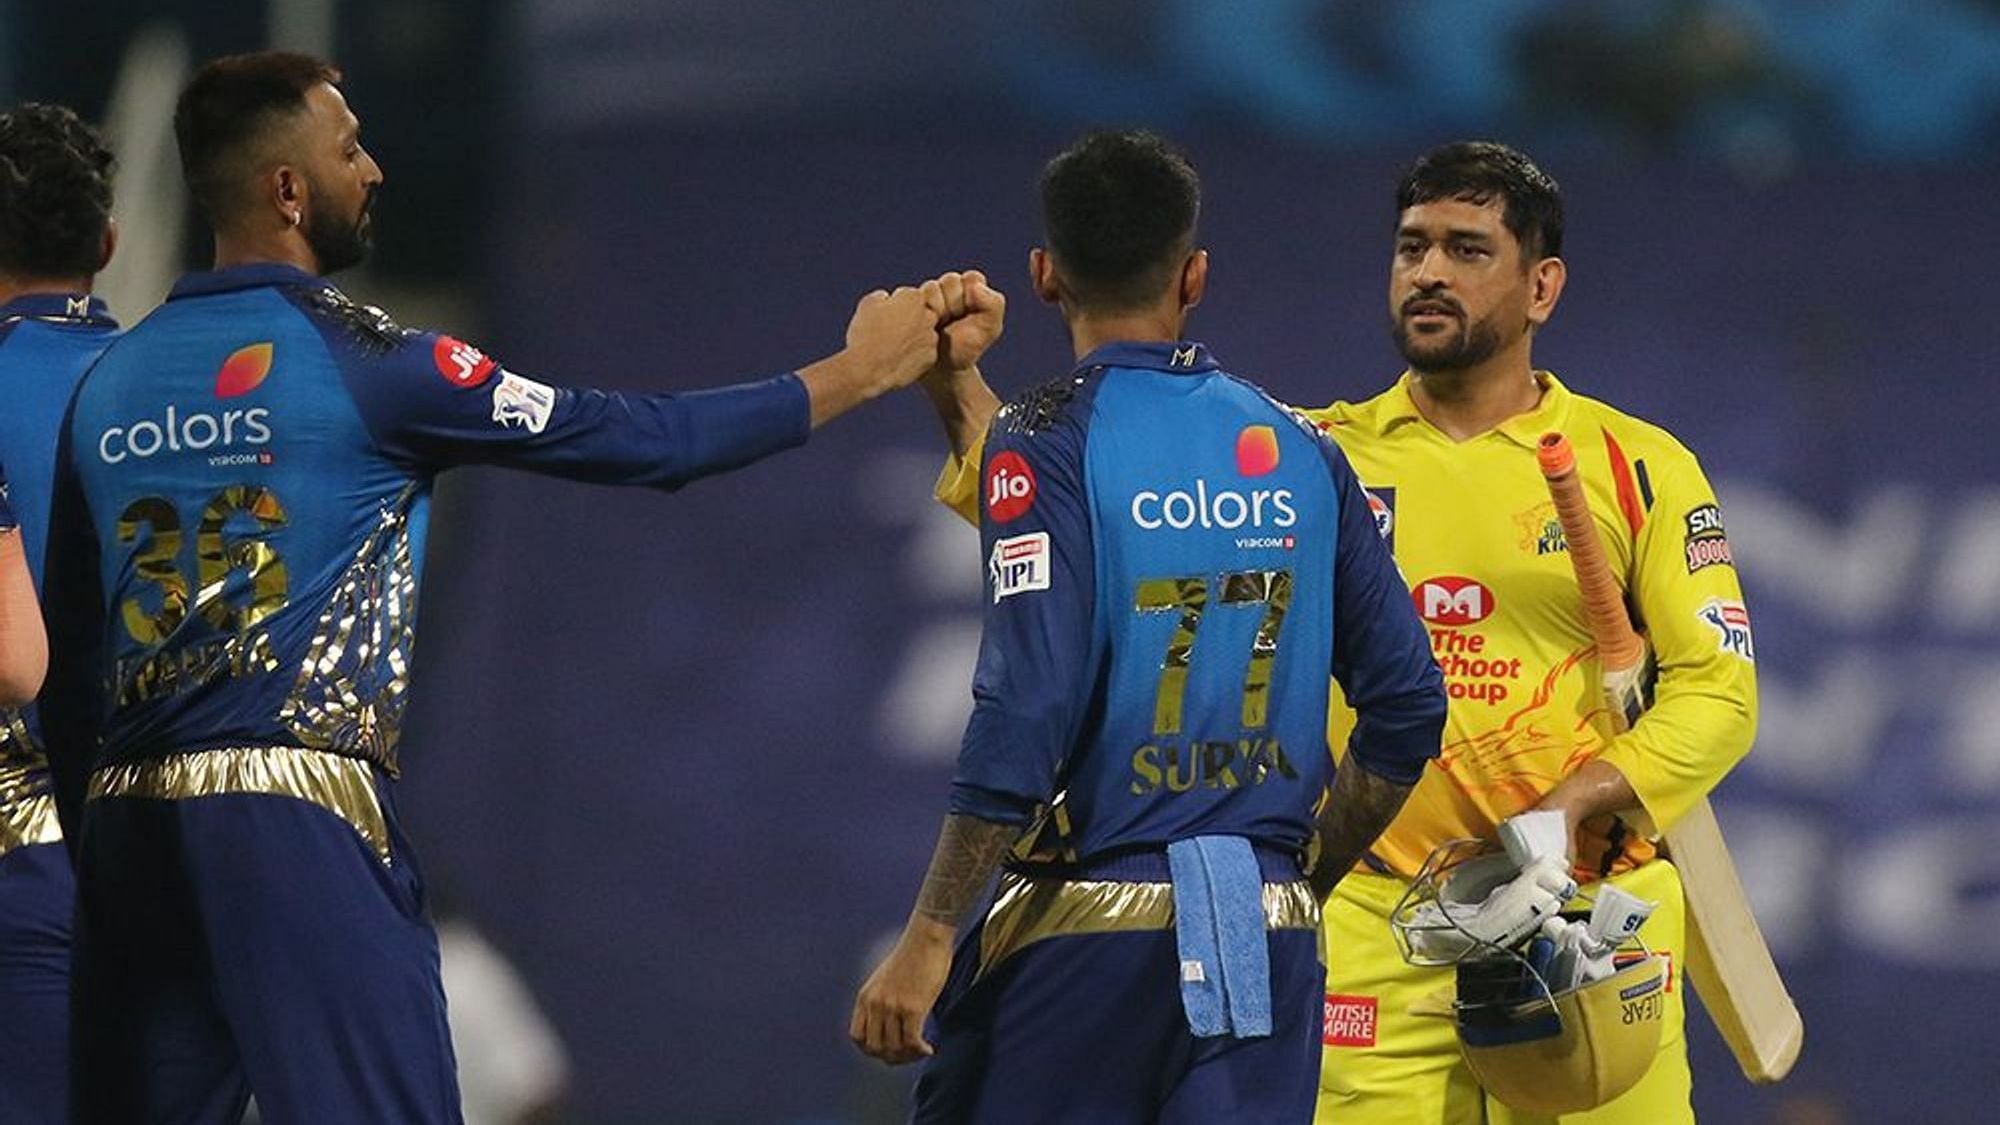 IPL 2020 opener Mumbai Indians vs Chennai Super Kings was watched by 20 Crore viewers as per BARC